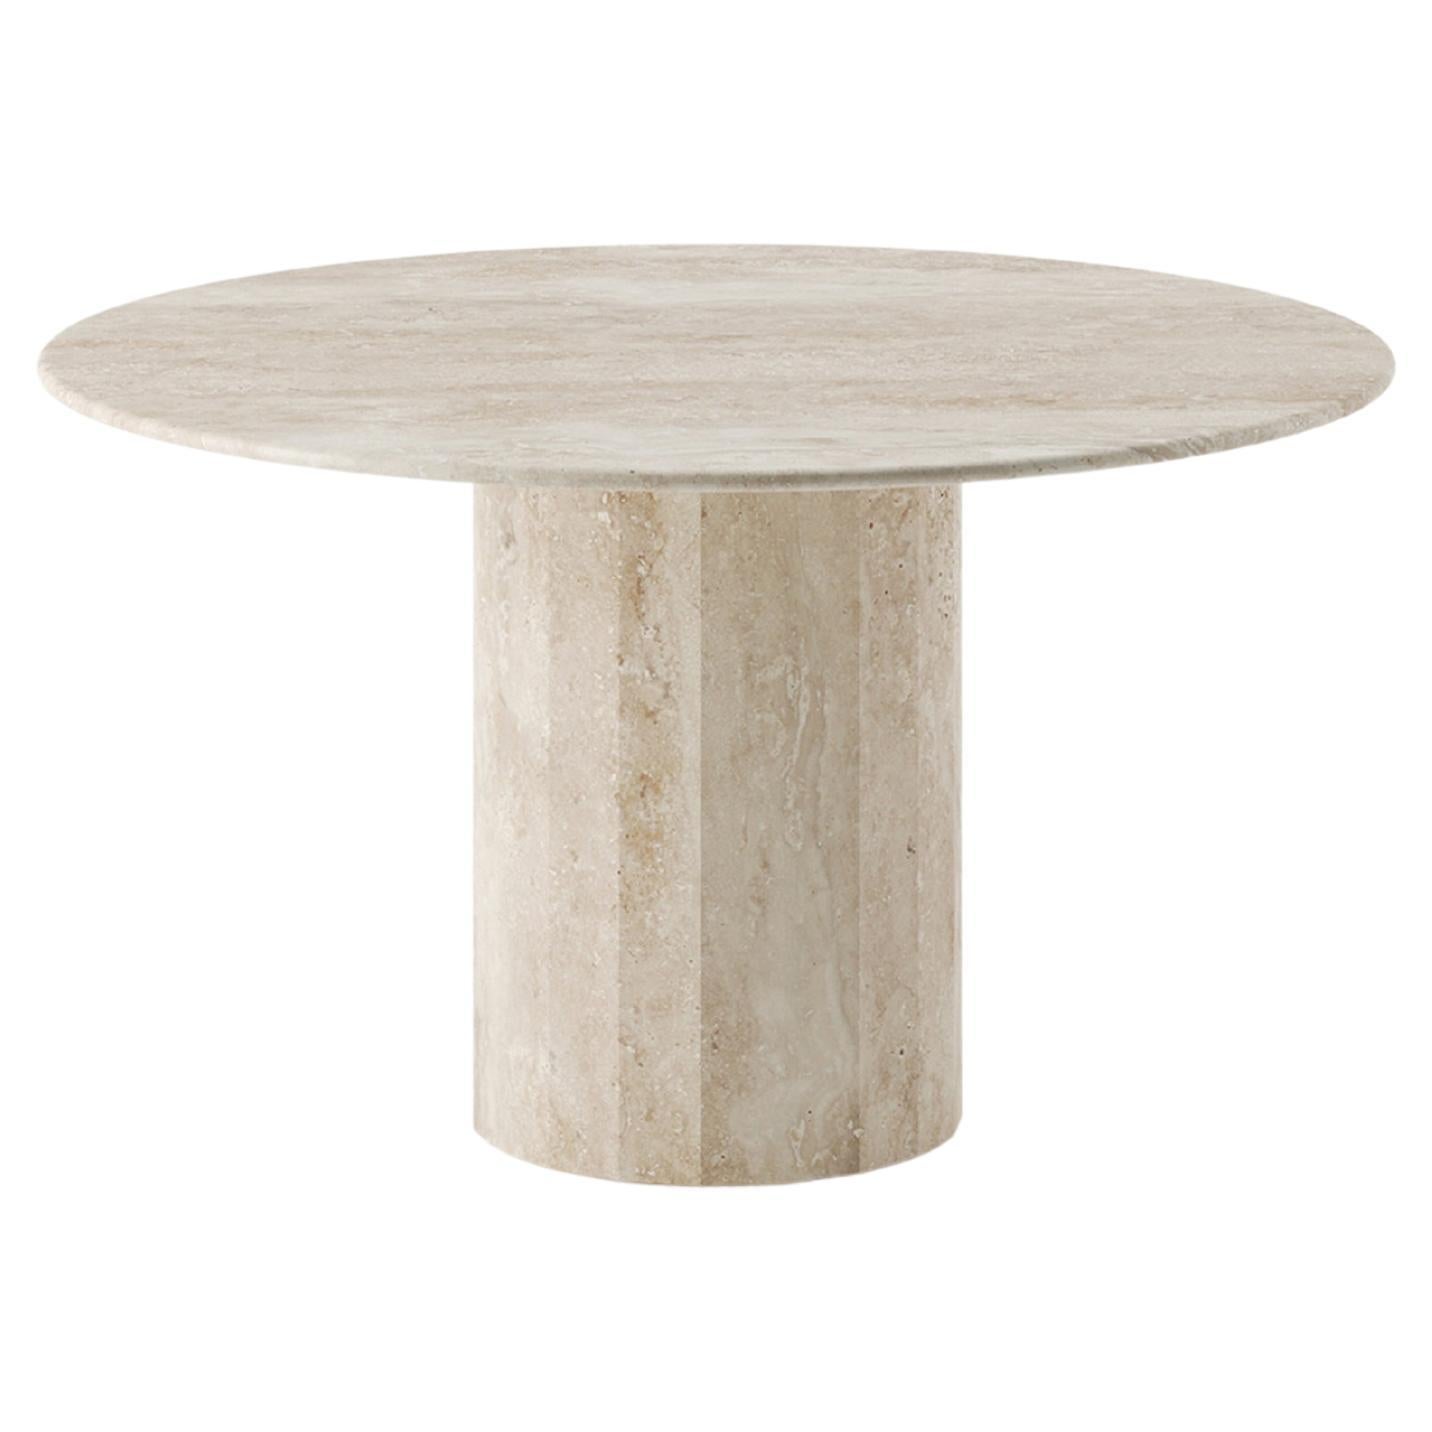 Palladian 130cm/51.2" Round Table in Natural Travertine  For Sale